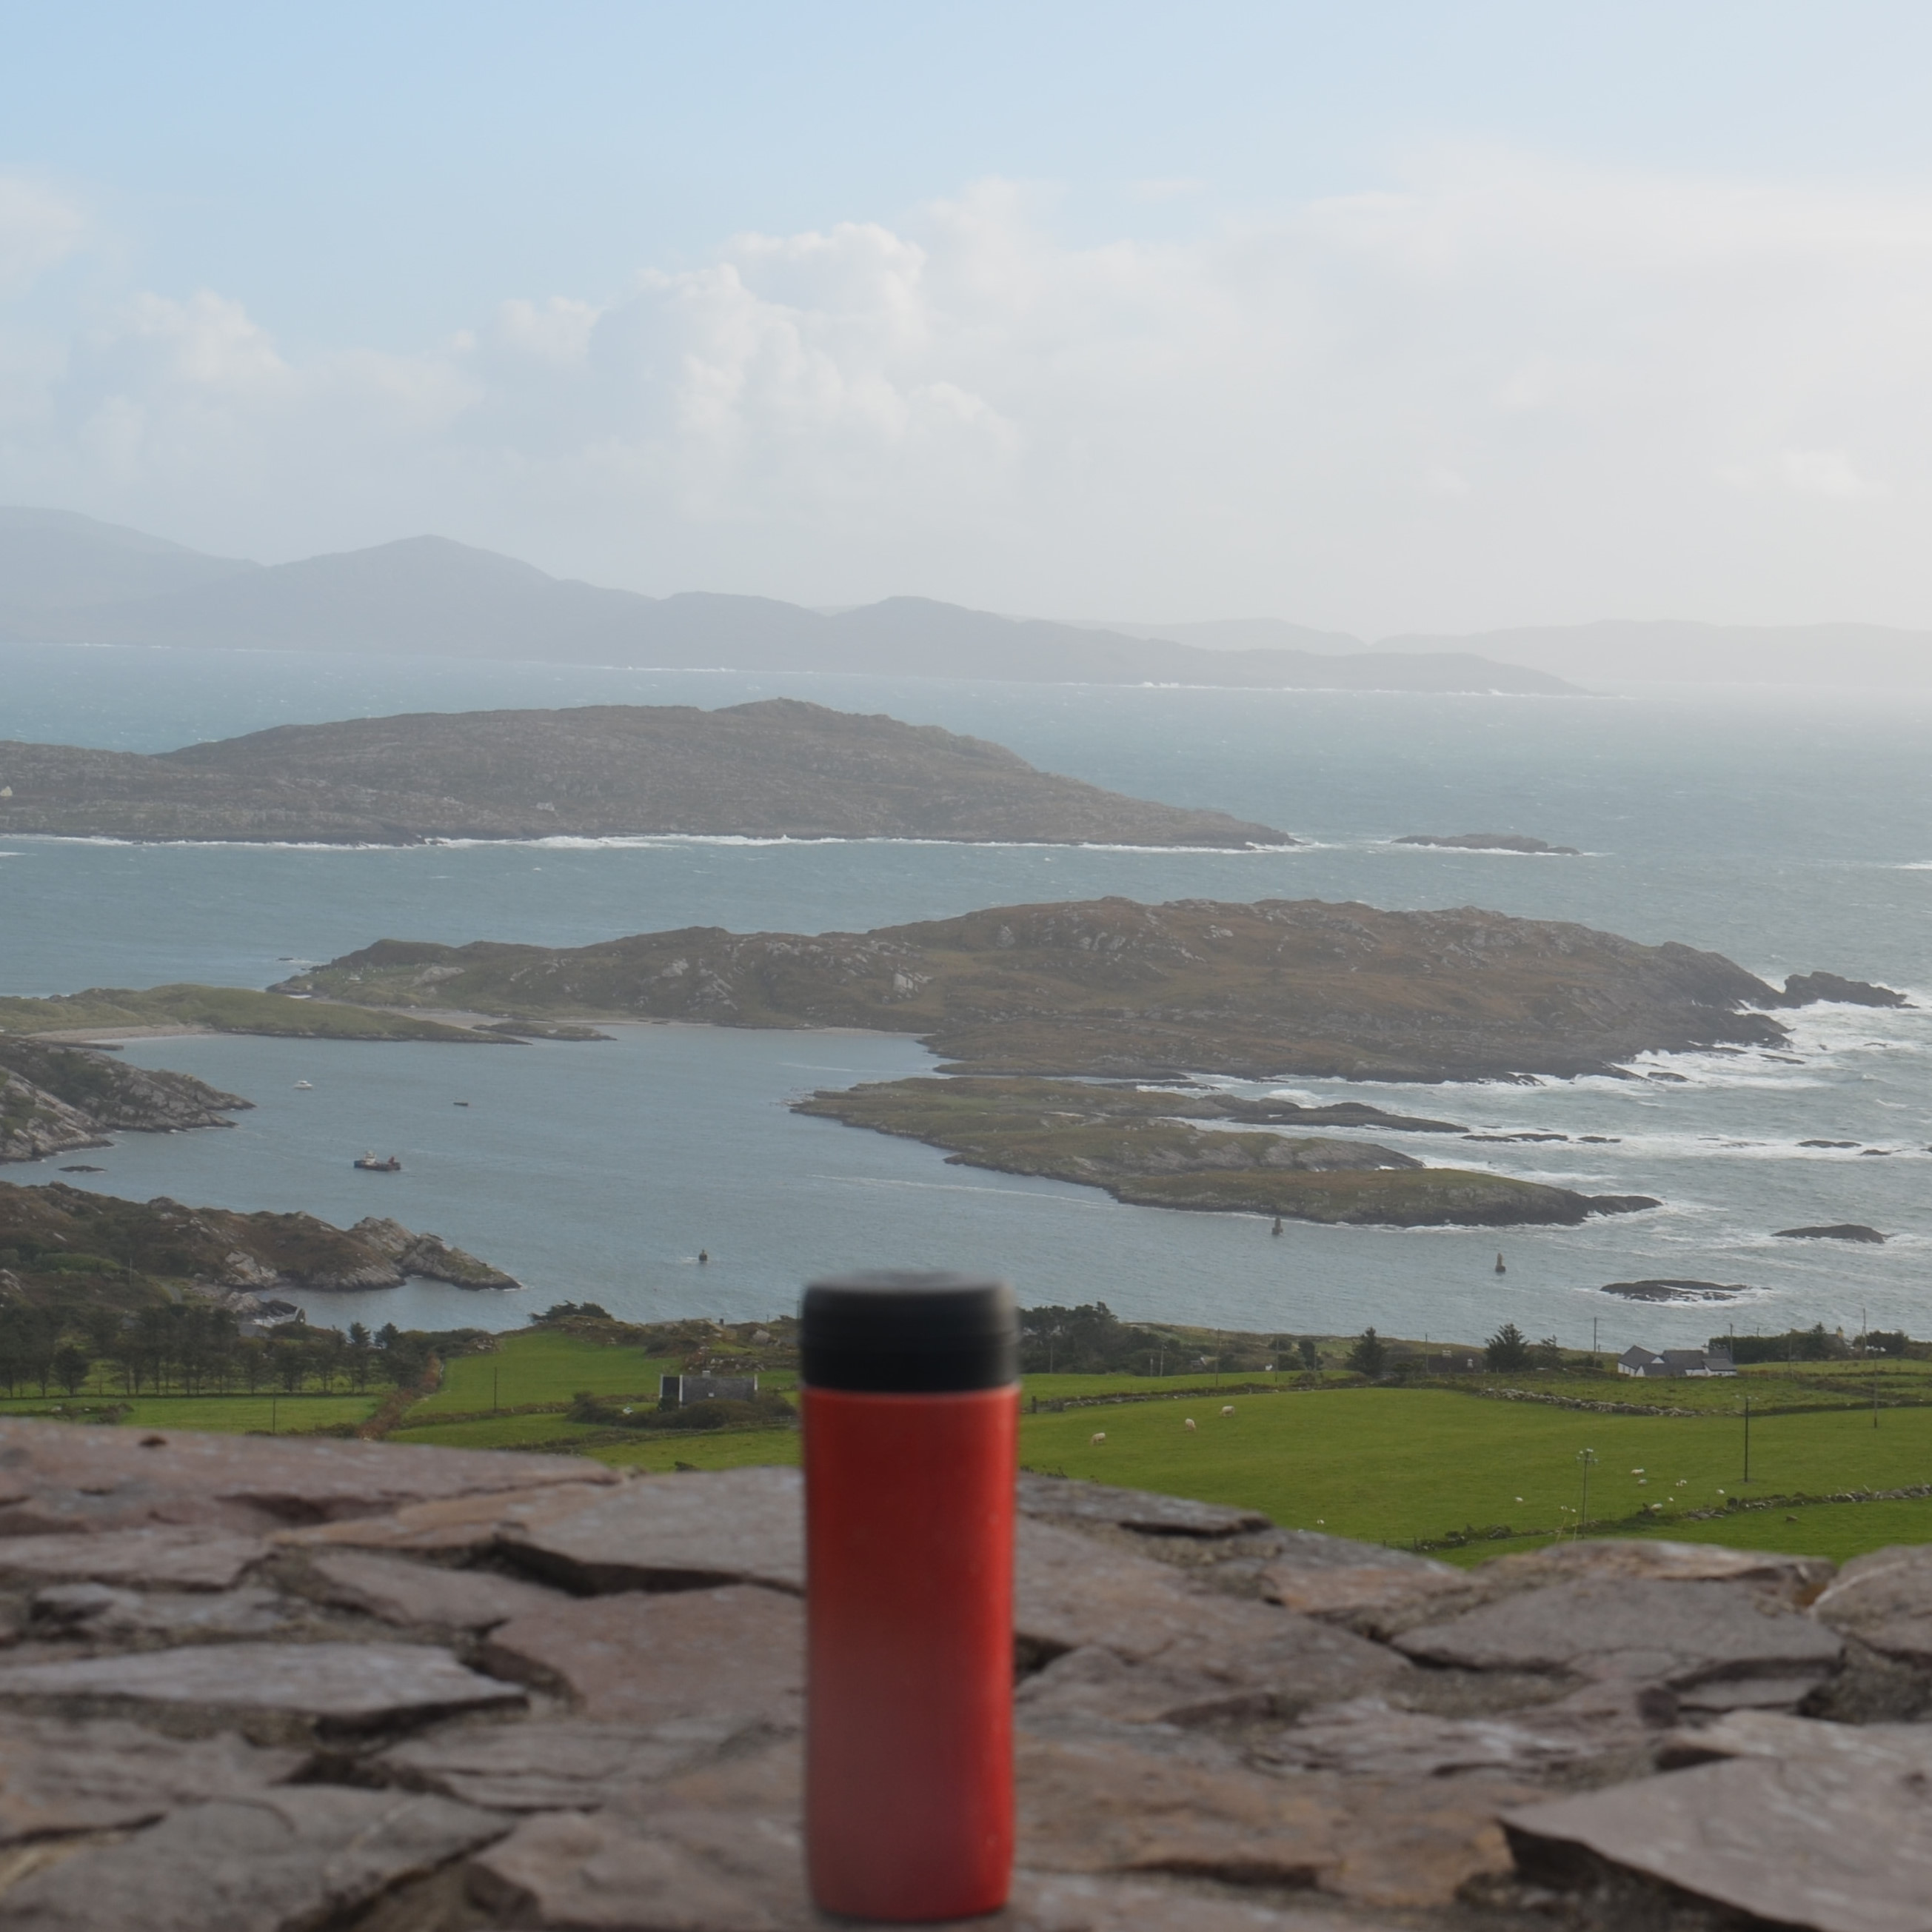 My Travel Press, at a stop on the southern part of the Ring of Kerry, overlooking Abbey Island with the Lambs Head headland beyond that, and, in the far distance, the Bere Peninsular.